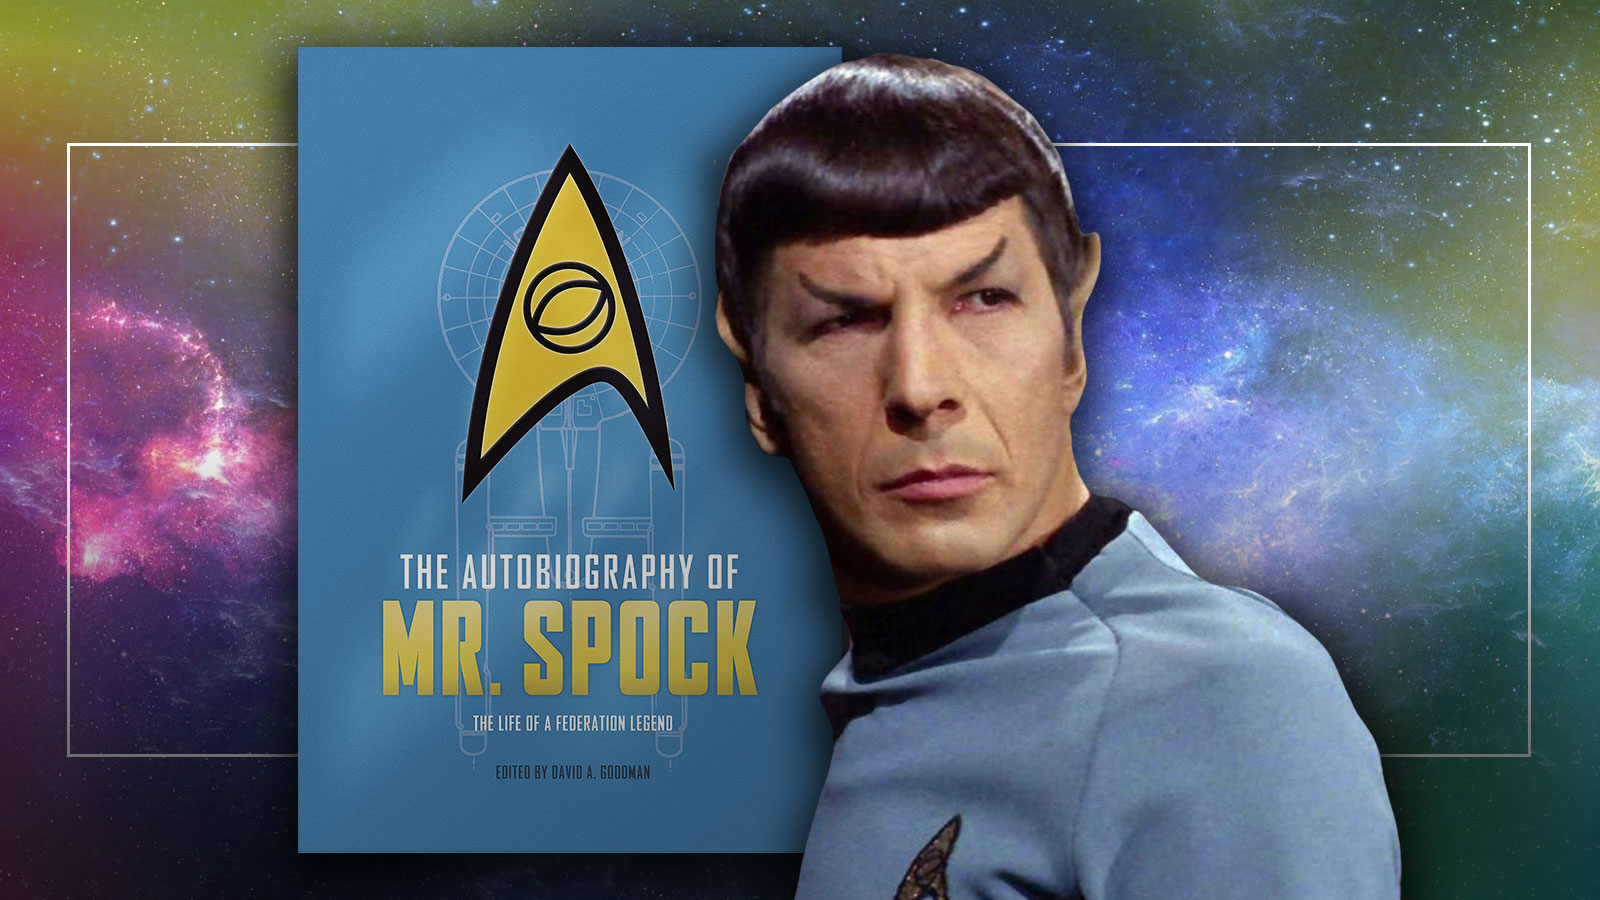 The Autobiography Of Mr. Spock Review: A Fantastic Look At Star Trek’s Legendary Vulcan